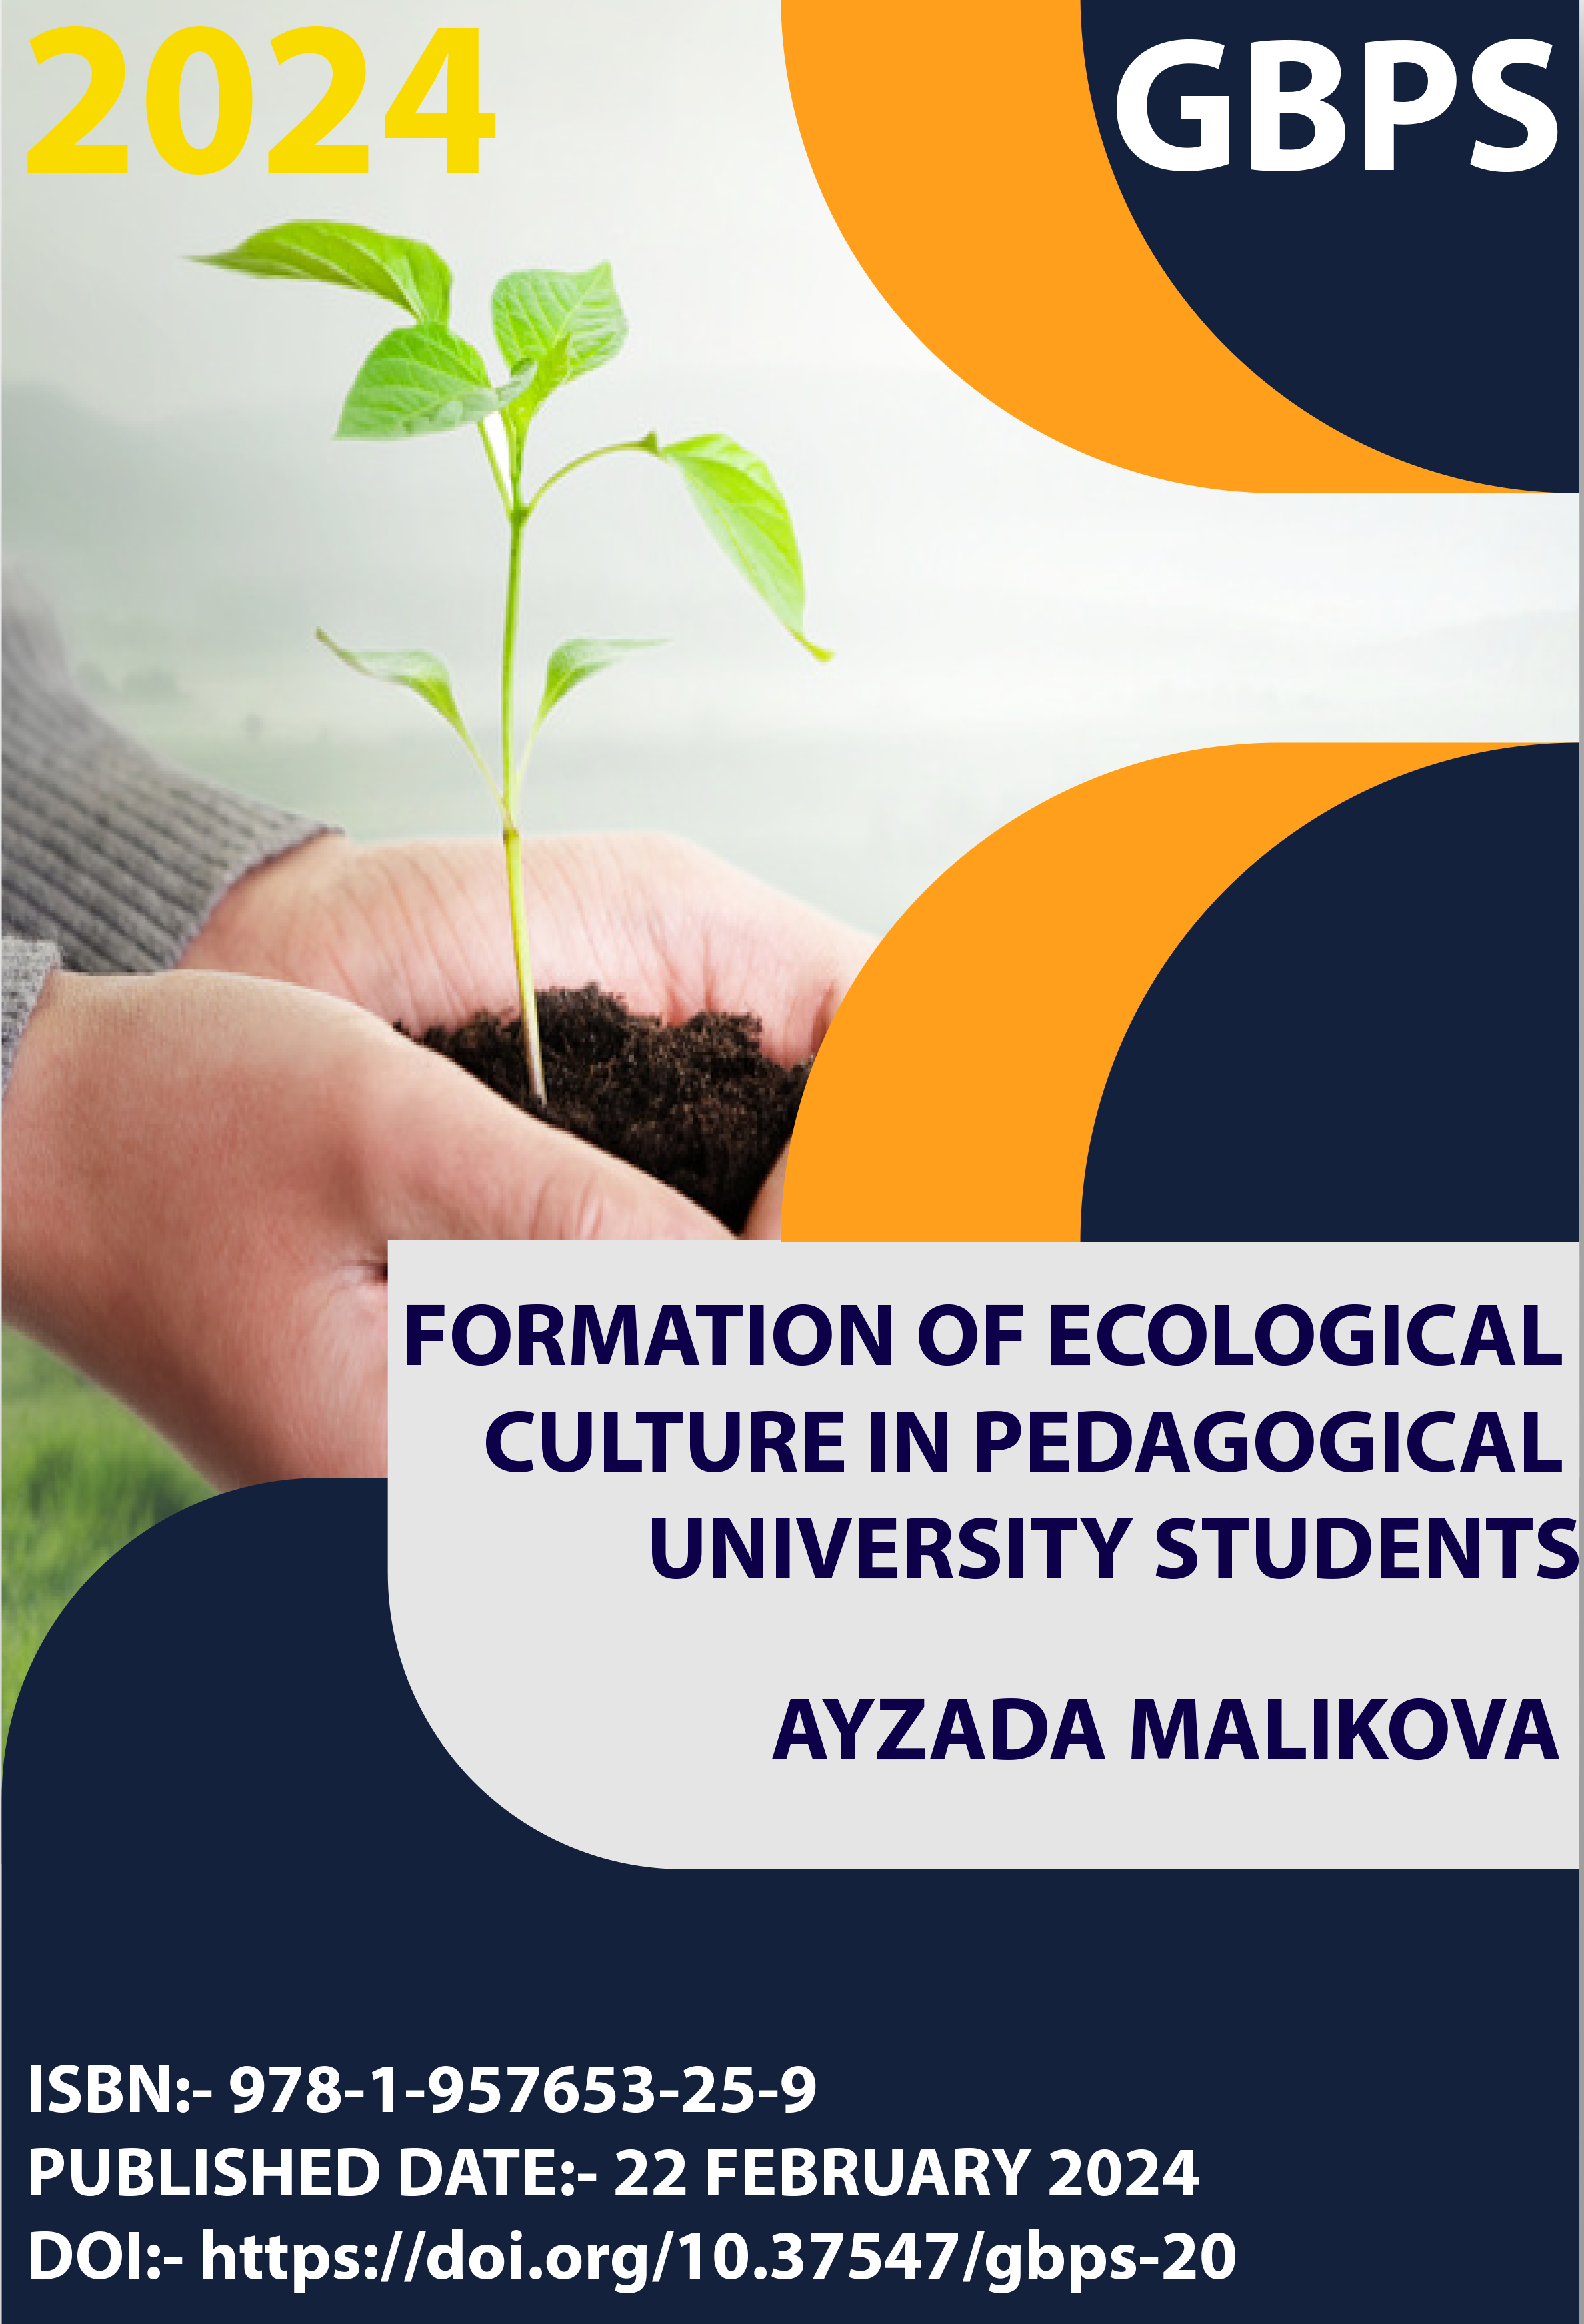 					View FORMATION OF ECOLOGICAL CULTURE IN PEDAGOGICAL UNIVERSITY STUDENTS
				